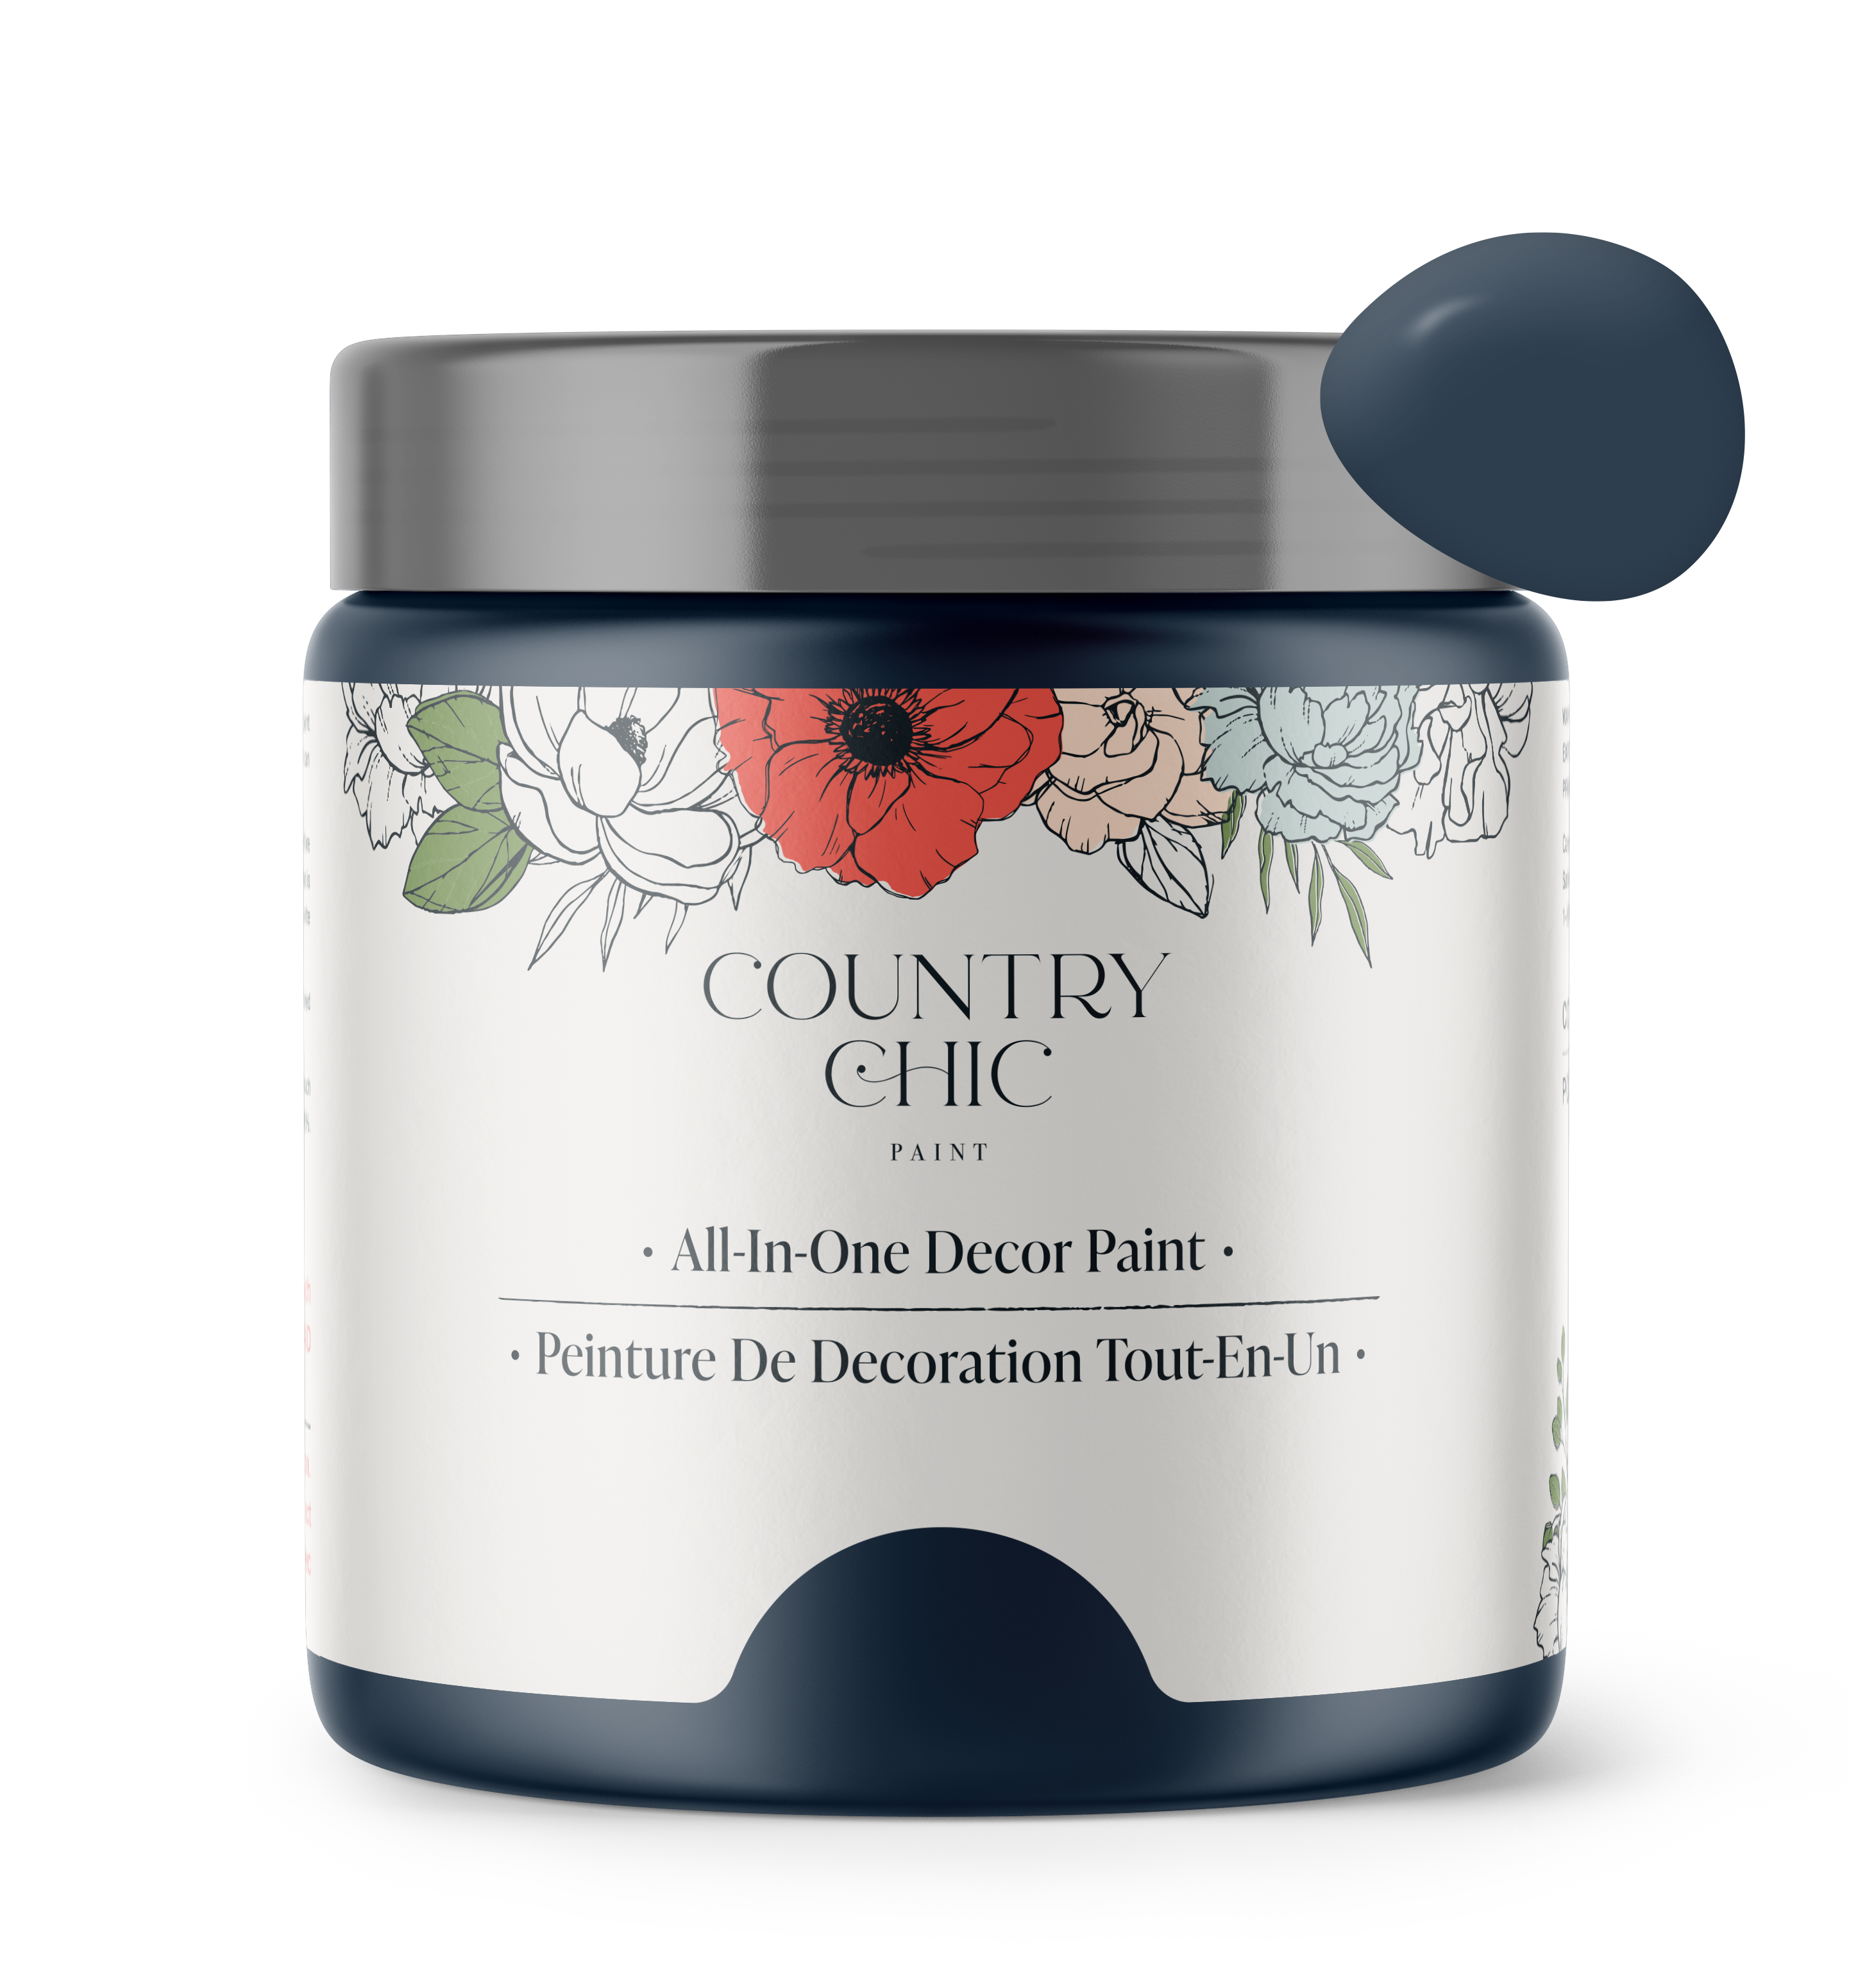 All-in-One Decor Paint - Peacoat